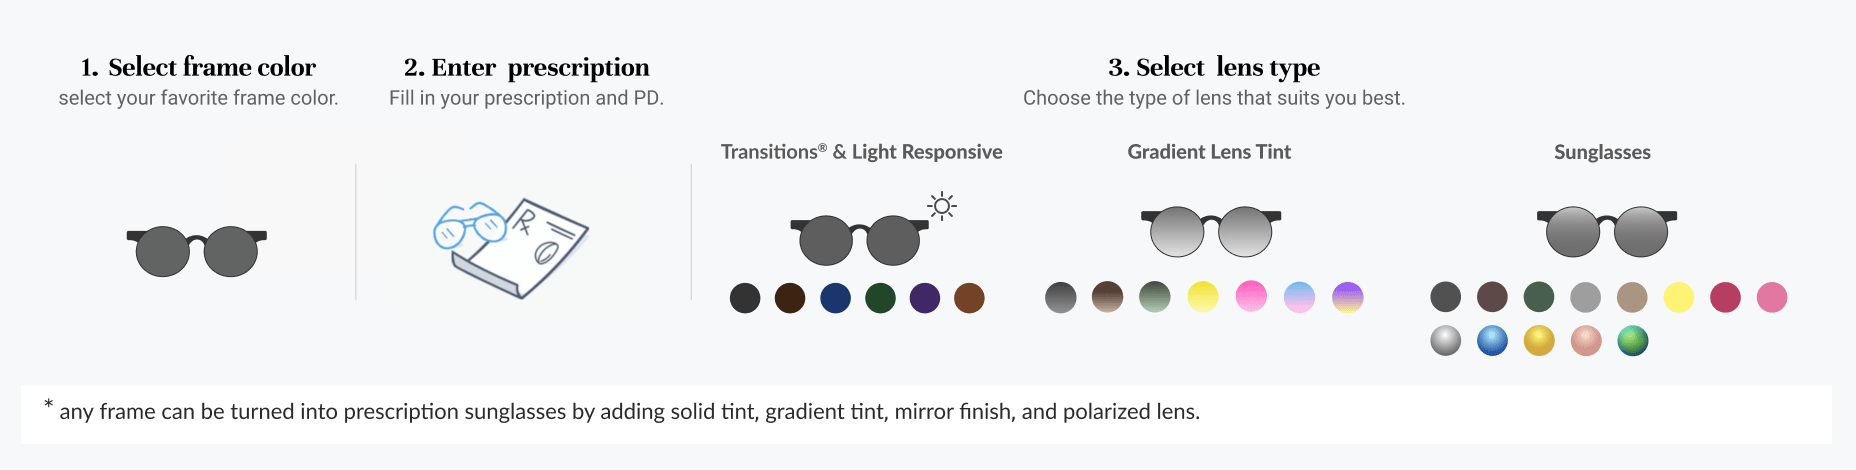 How to Order Sunglasses